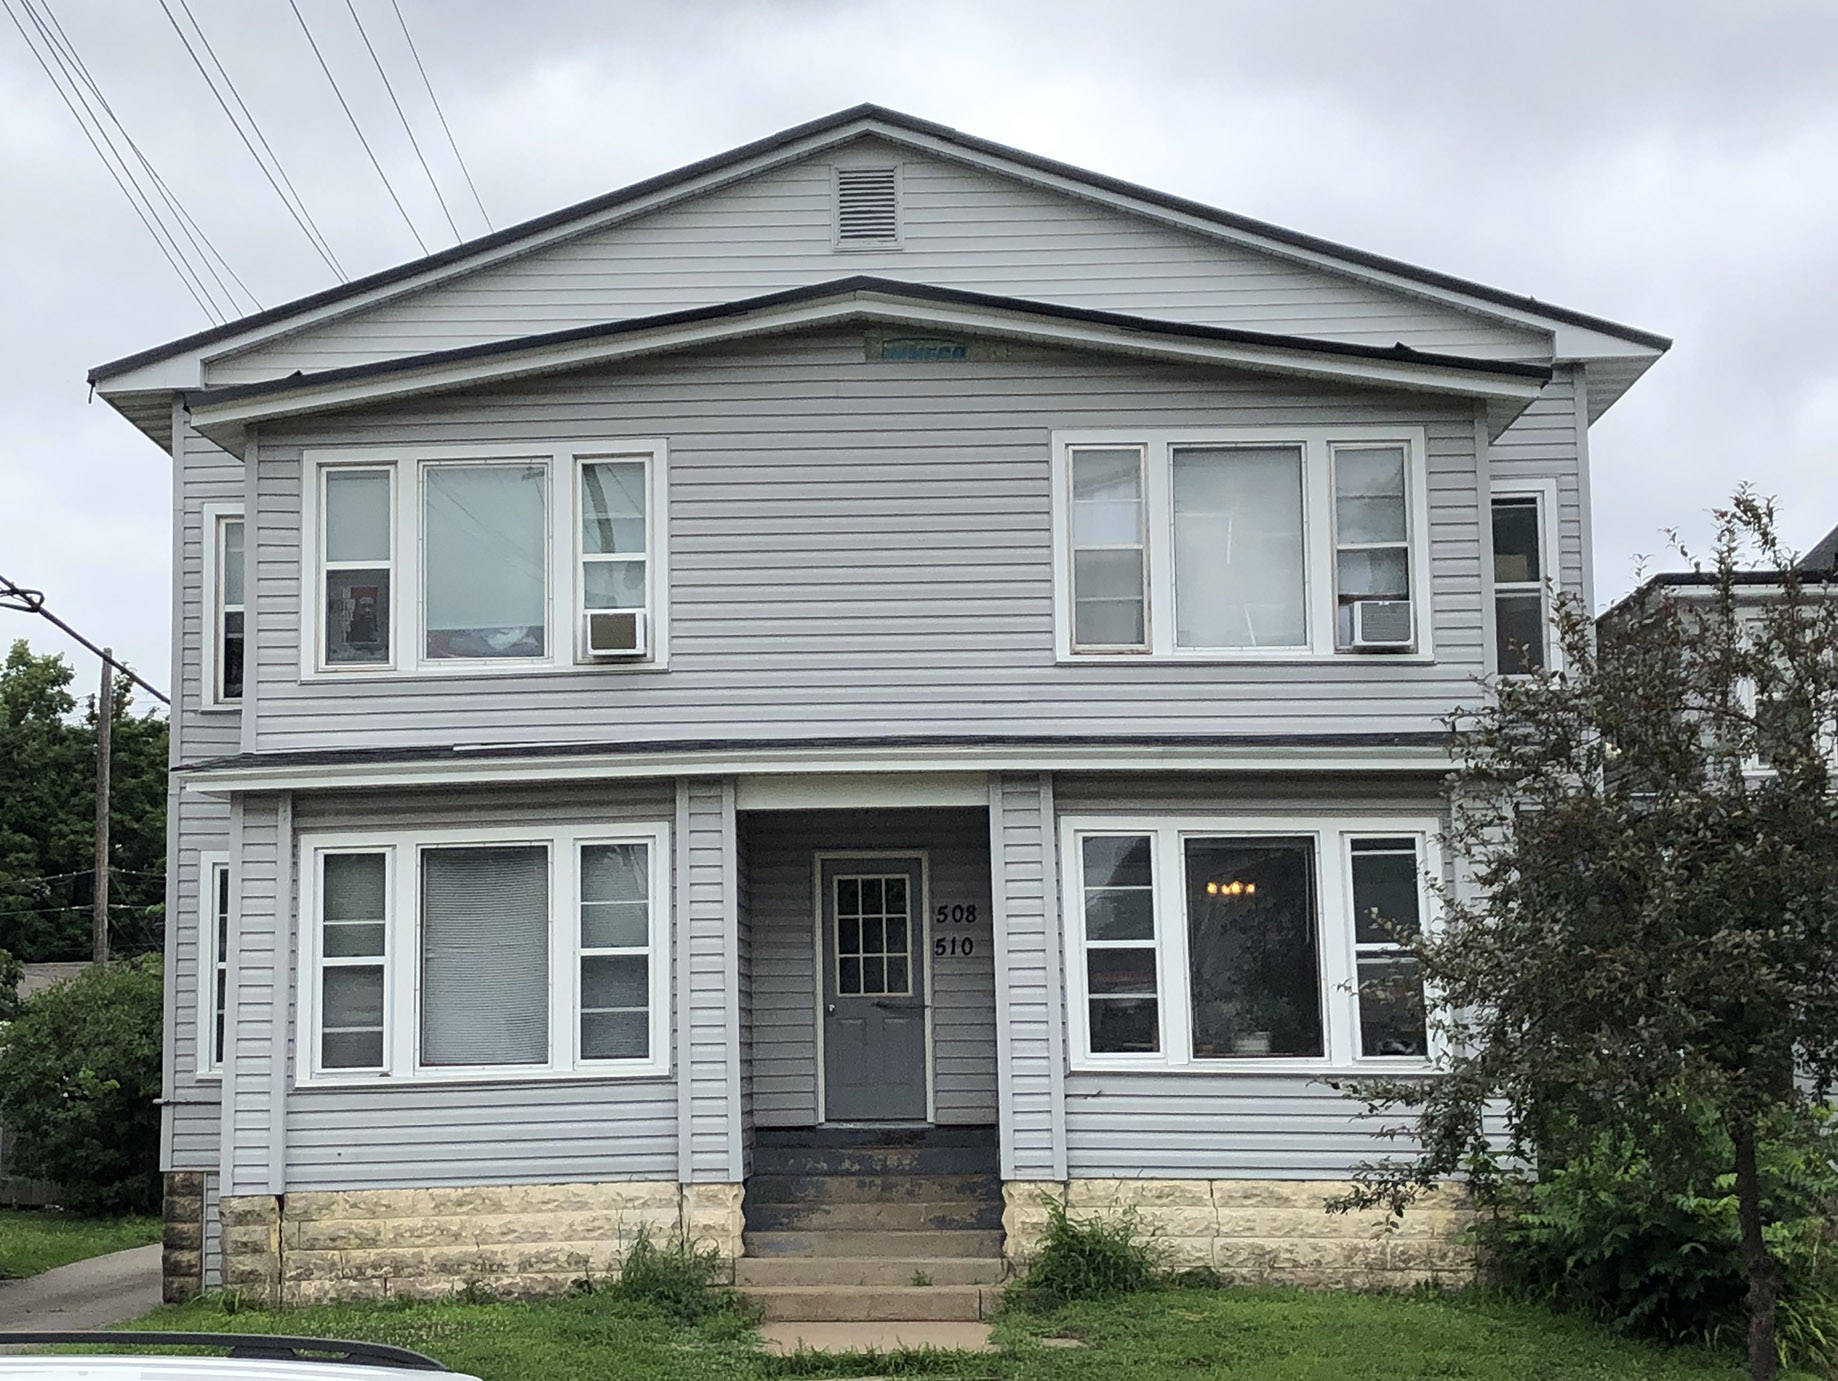 508 West Grand Ave, Eau Claire, Wisconsin 54703, 1 Bedroom Bedrooms, ,1 BathroomBathrooms,Multi-Family,Apartment,508 West Grand Ave,1124